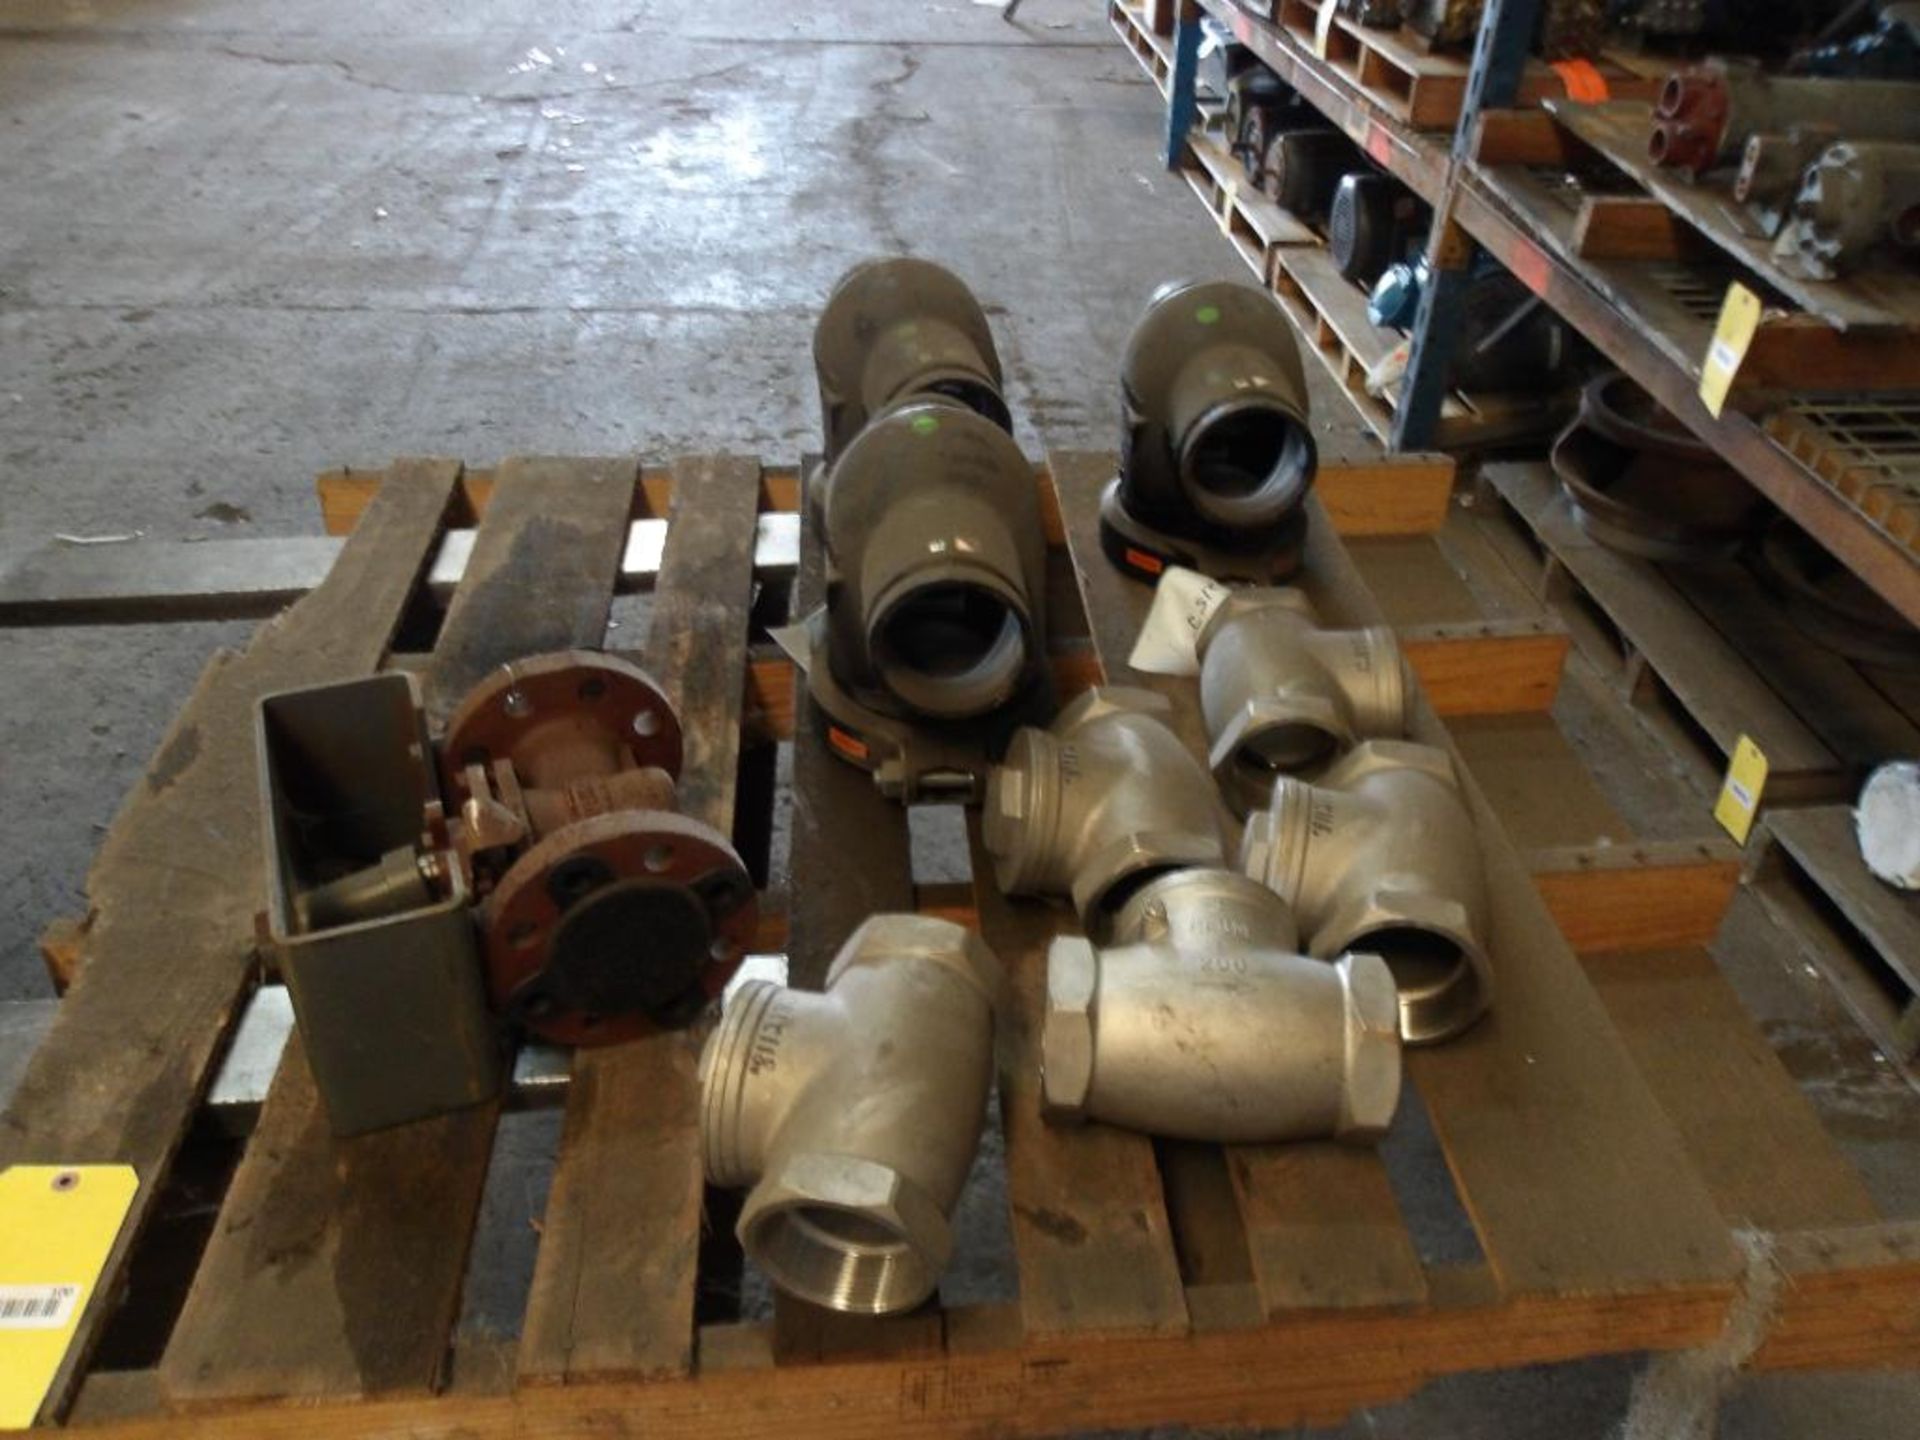 Valves, Check & Plug Valves, 3" & 4", Stainless Steel & Iron: Victaulic & Durco (New)